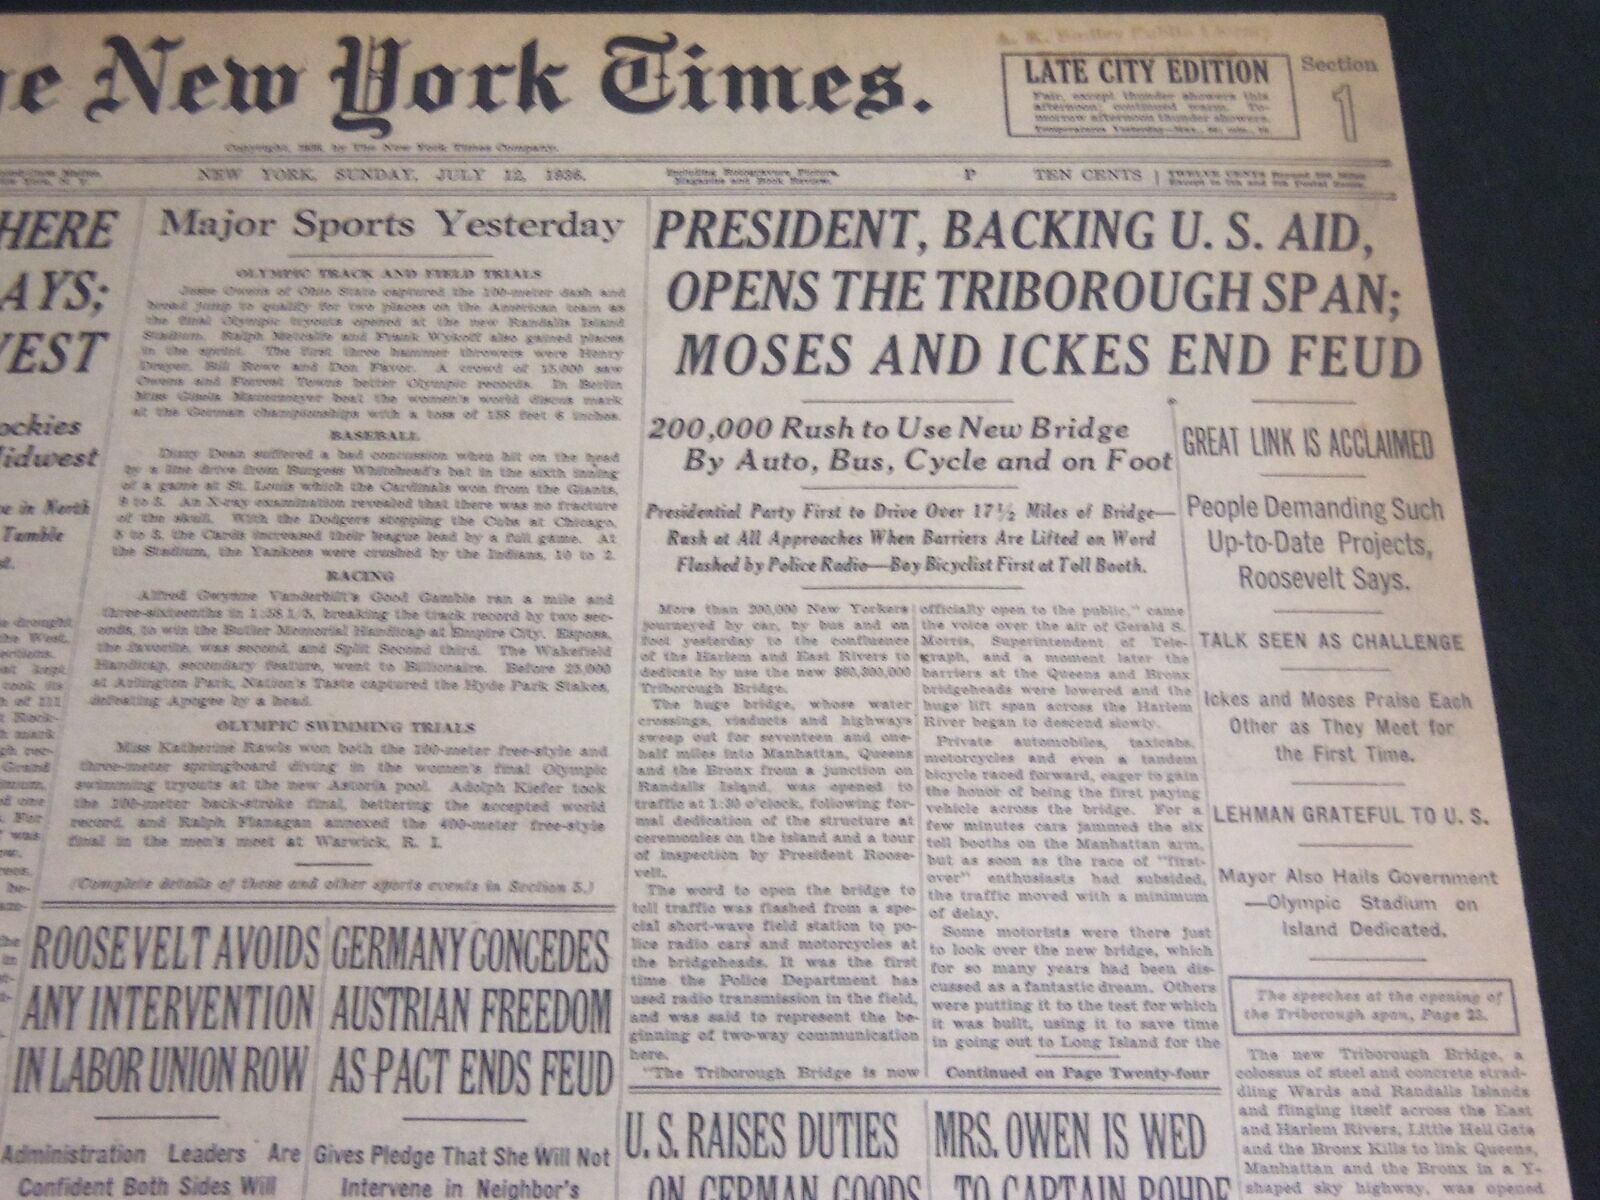 1936 JULY 12 NEW YORK TIMES - PRESIDENT OPENS THE TRIBOROUGH SPAN - NT 7133